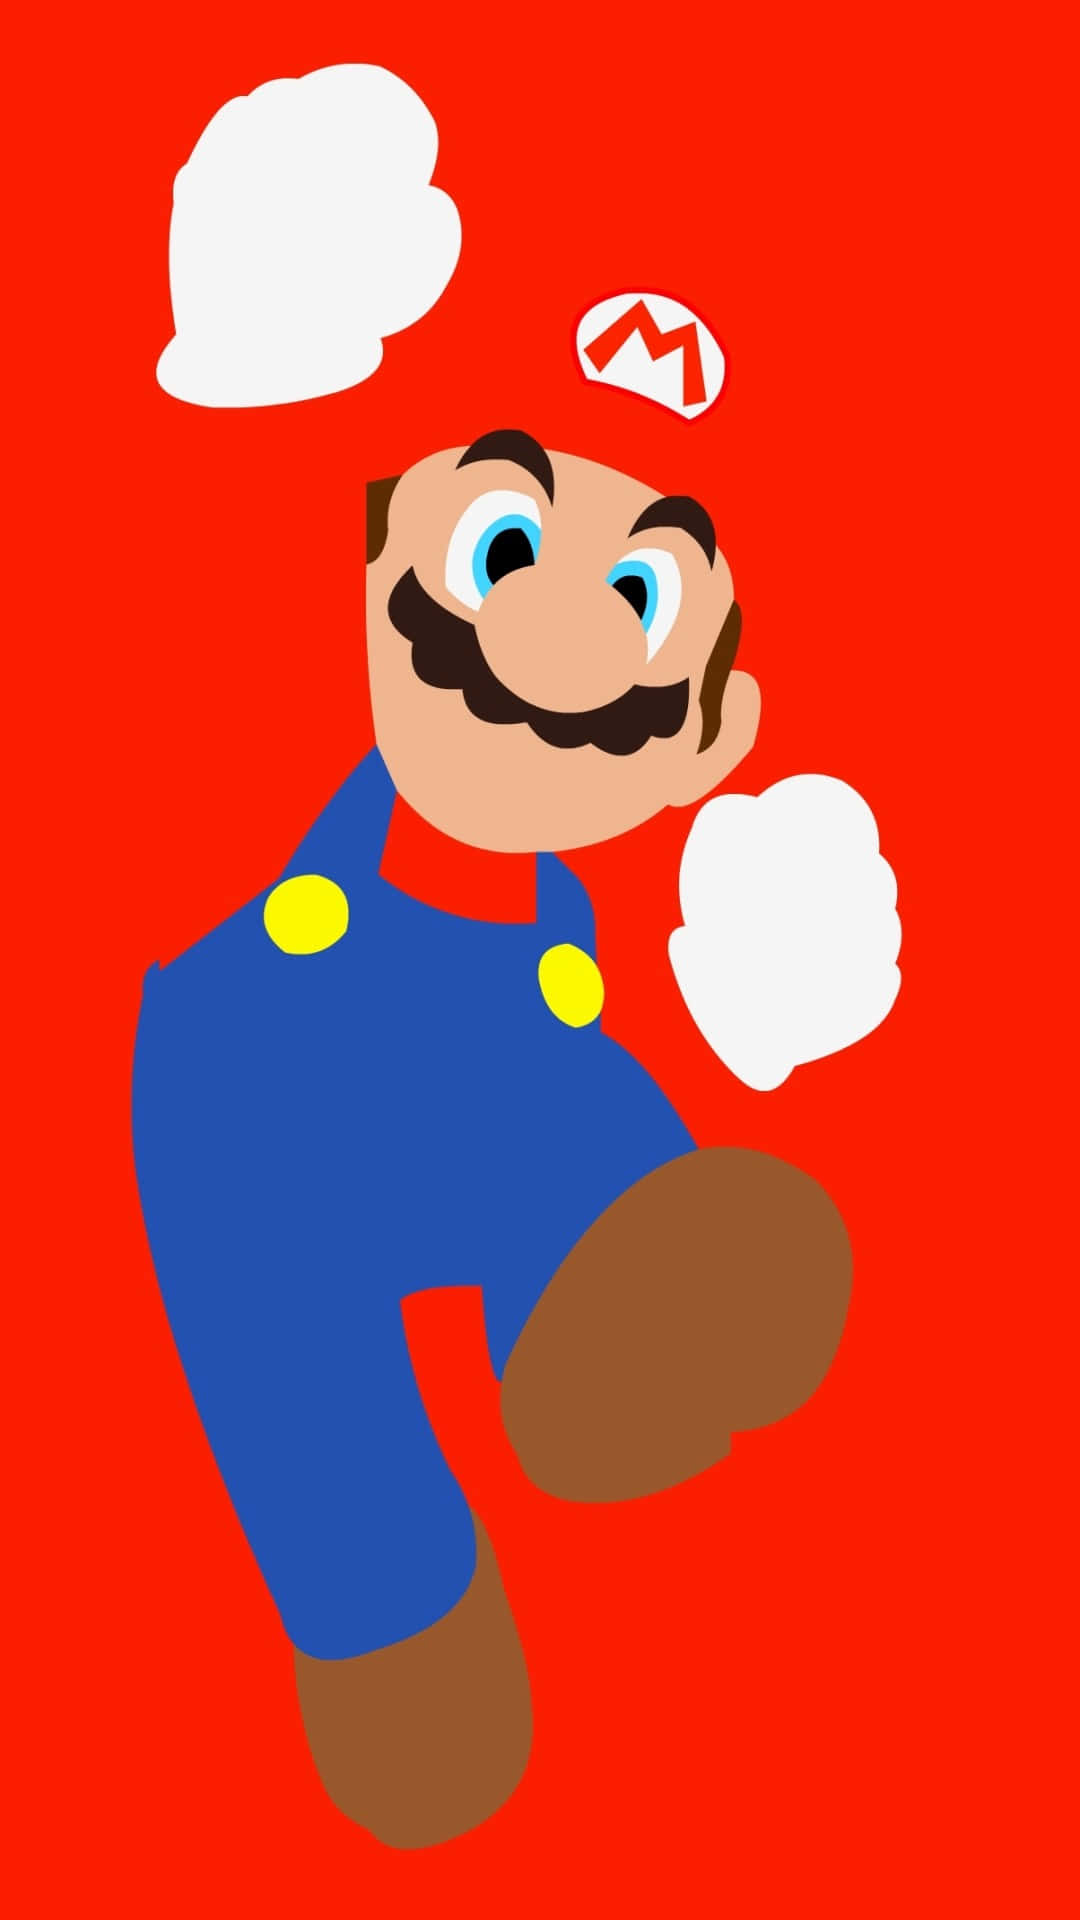 Play Super Mario on your iPhone! Wallpaper